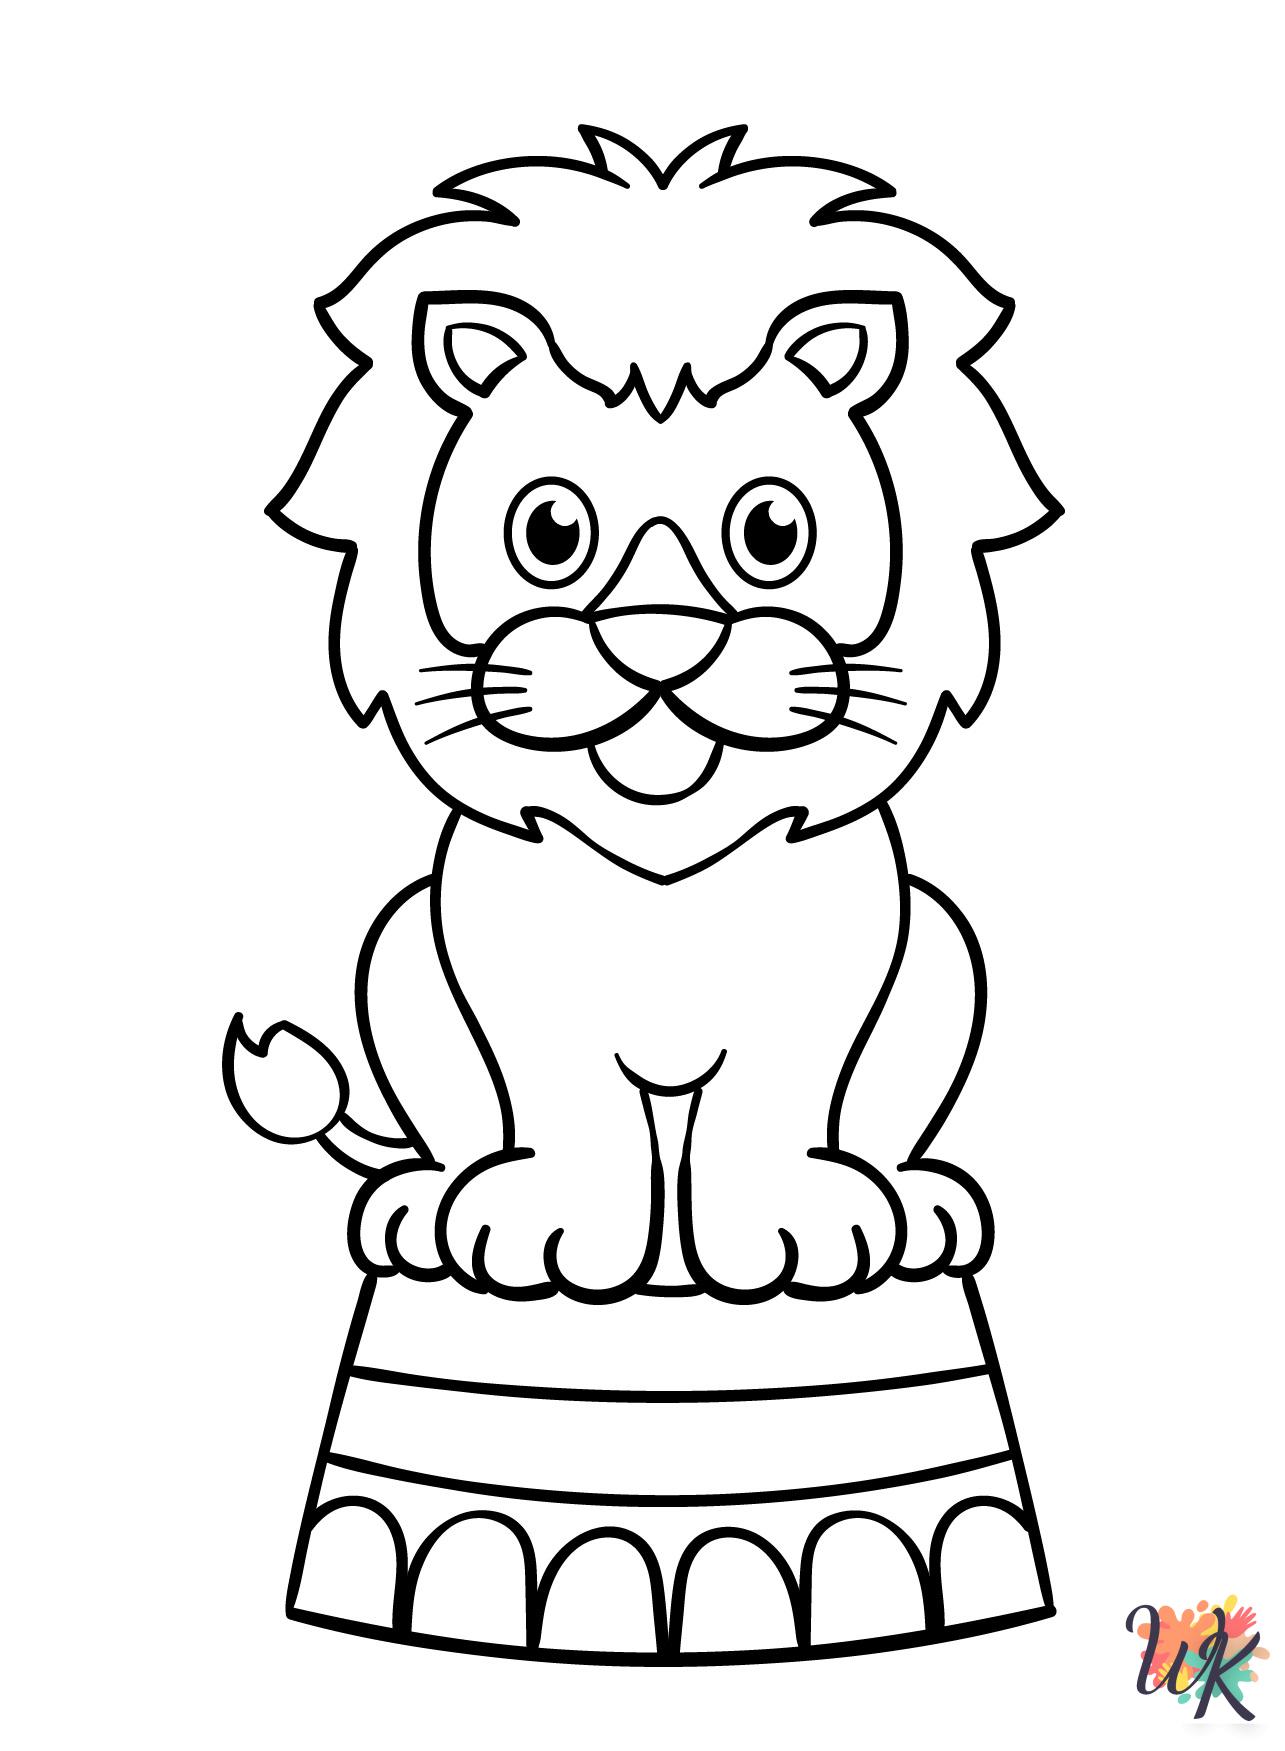 old-fashioned Circus coloring pages